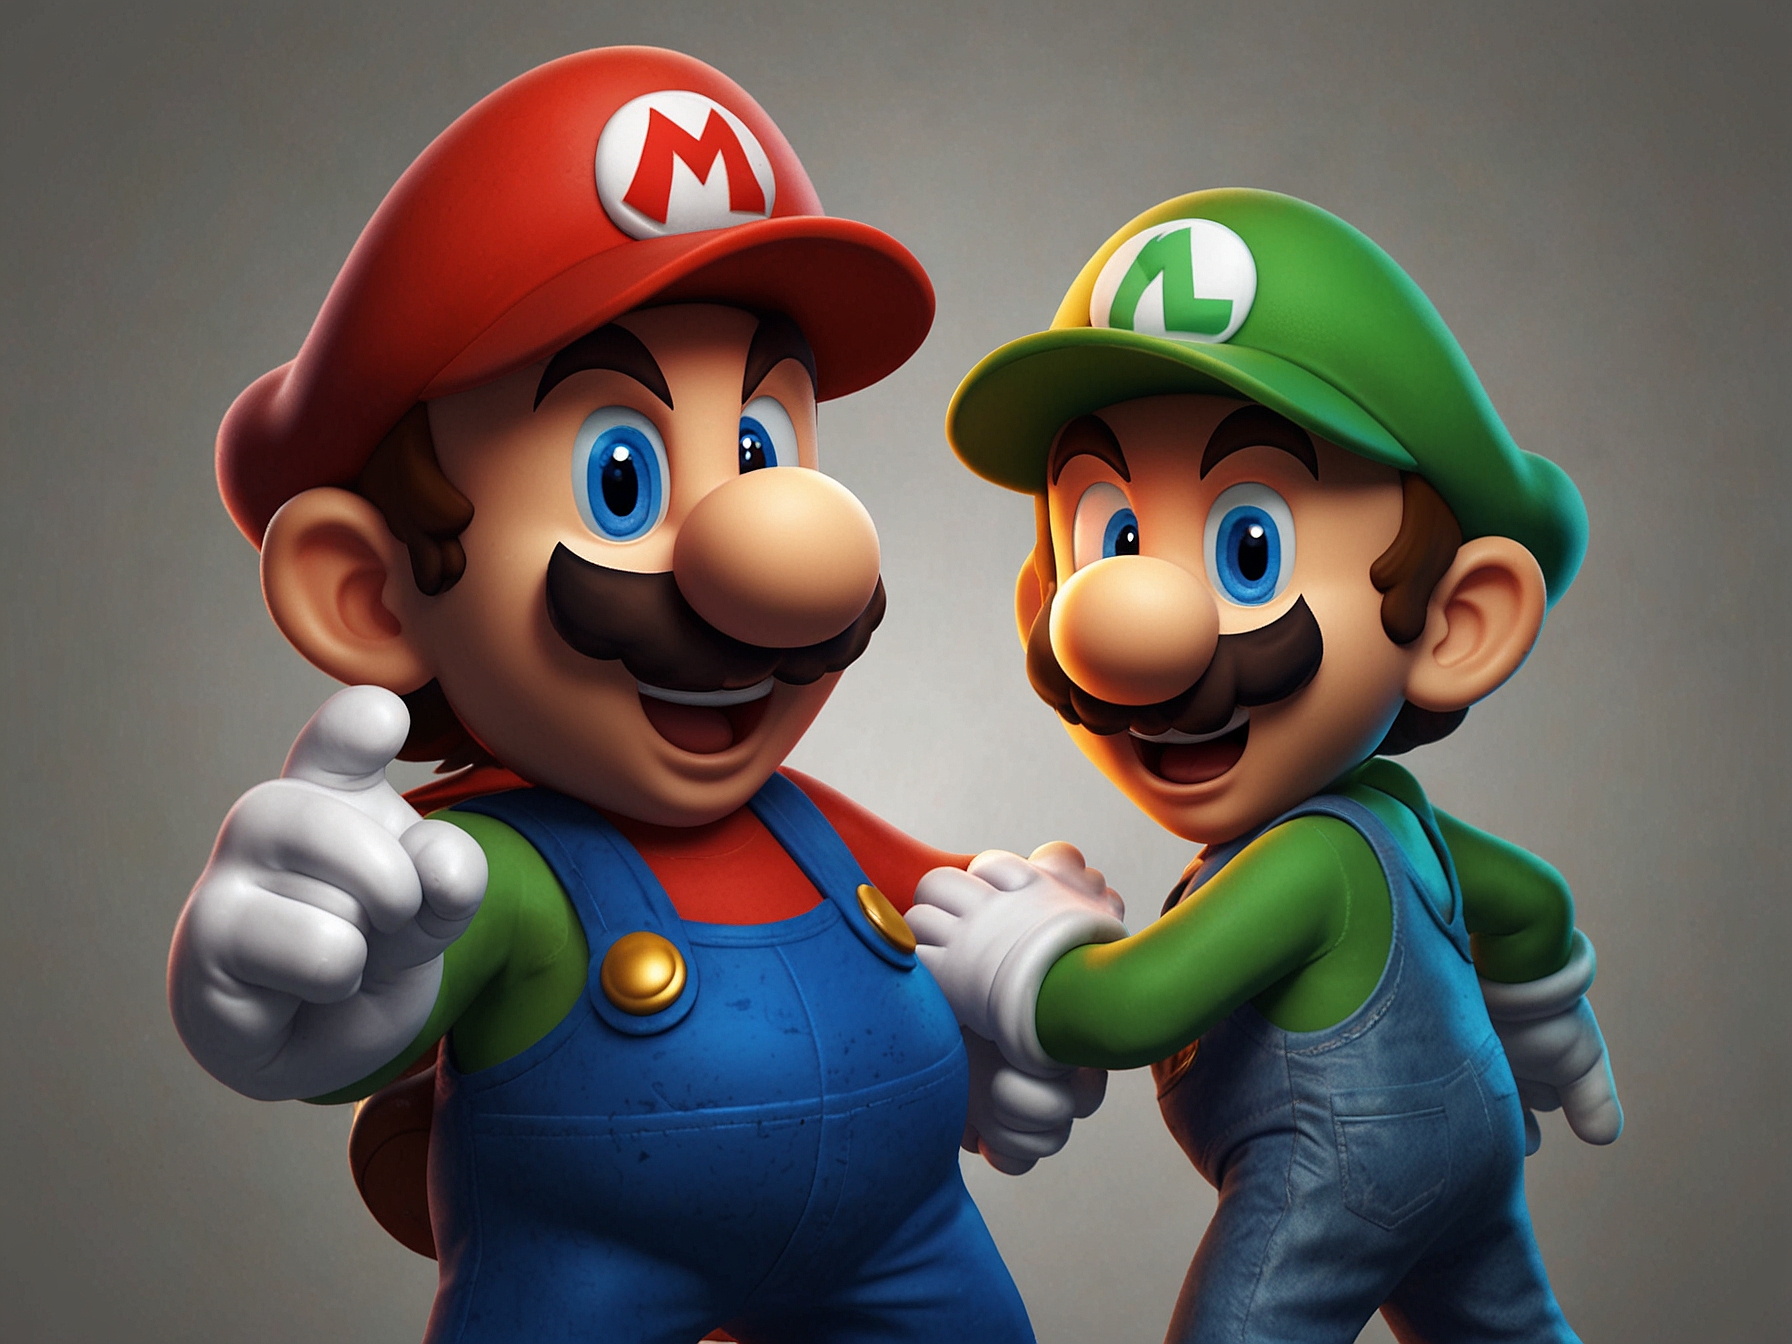 A vibrant and colorful teaser image of Mario & Luigi: Brothership showcasing Mario and Luigi in their classic poses, igniting excitement among fans for the new RPG adventure.